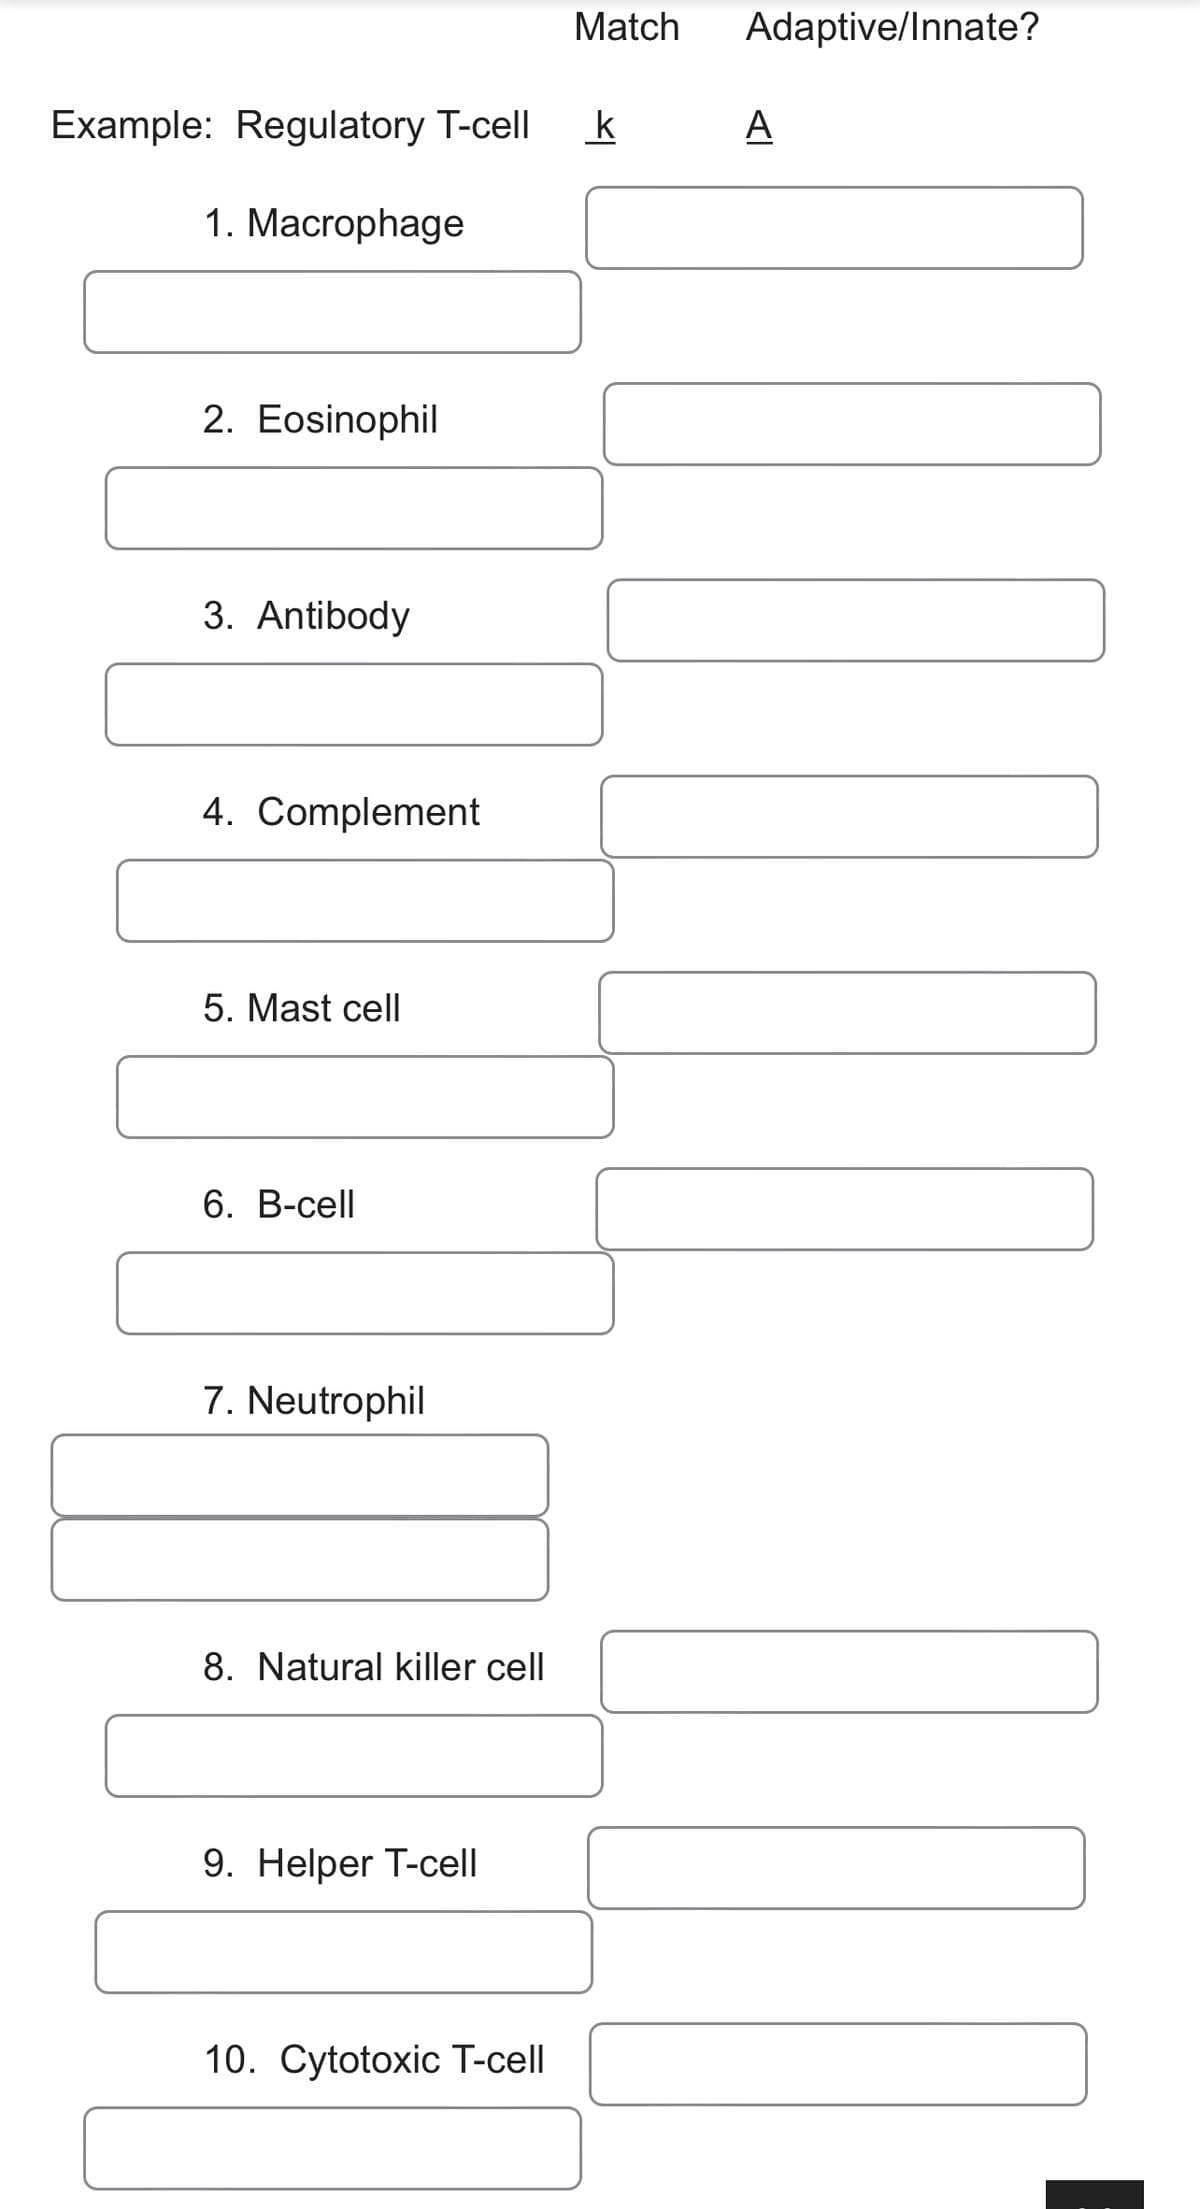 Match
Adaptive/Innate?
Example: Regulatory T-cell
k
A
1. Macrophage
2. Eosinophil
3. Antibody
4. Complement
5. Mast cell
6. В-сell
7. Neutrophil
8. Natural killer cell
9. Helper T-cell
10. Cytotoxic T-cell
